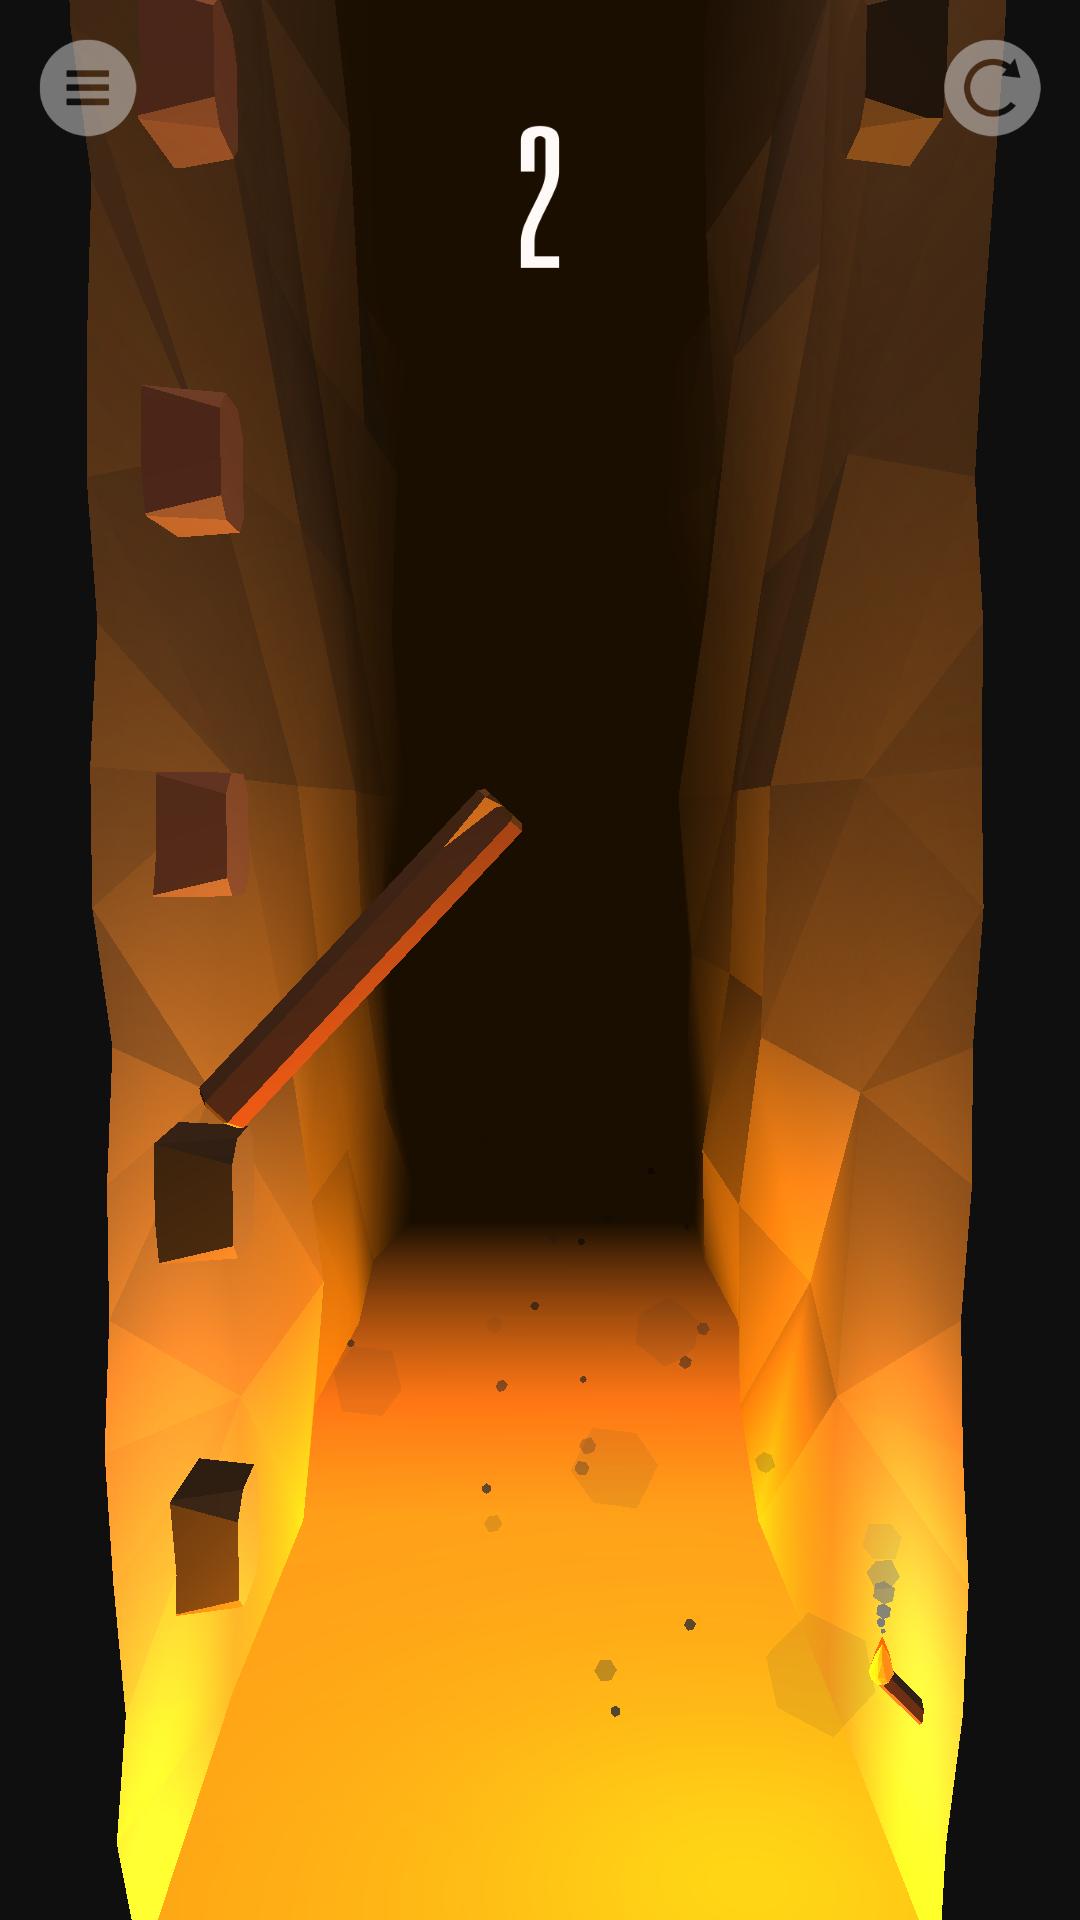 Log down. Купить a difficult game about climbing